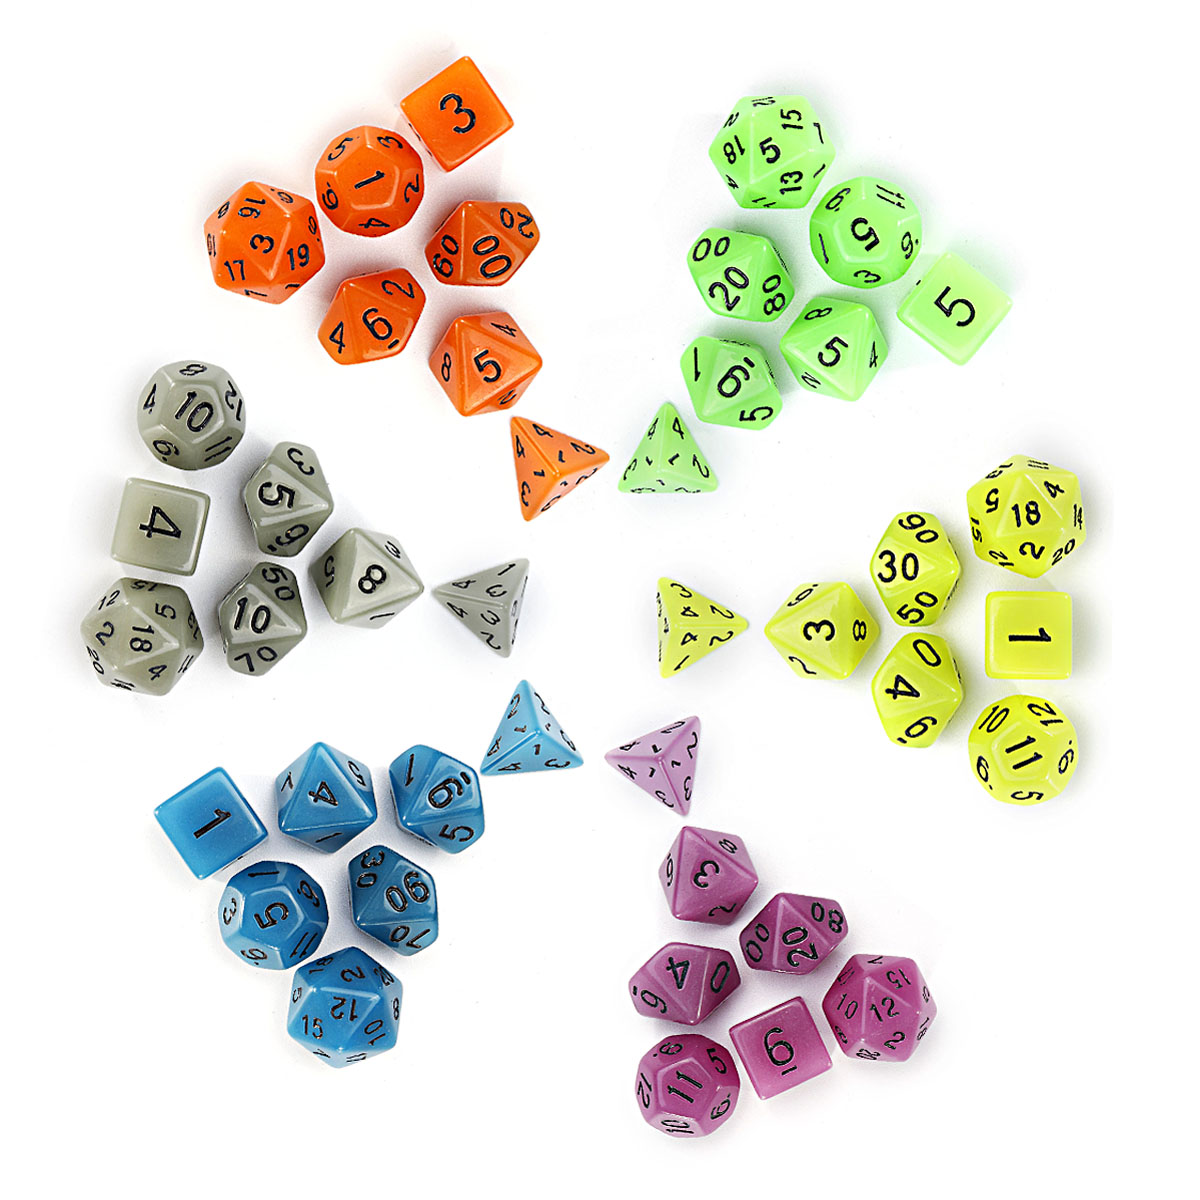 7-Pcs-Luminous-Polyhedral-Dices-Multi-sided-Dice-Set-Polyhedral-Dices-With-Dice-Cup-RPG-Gadget-1422236-4